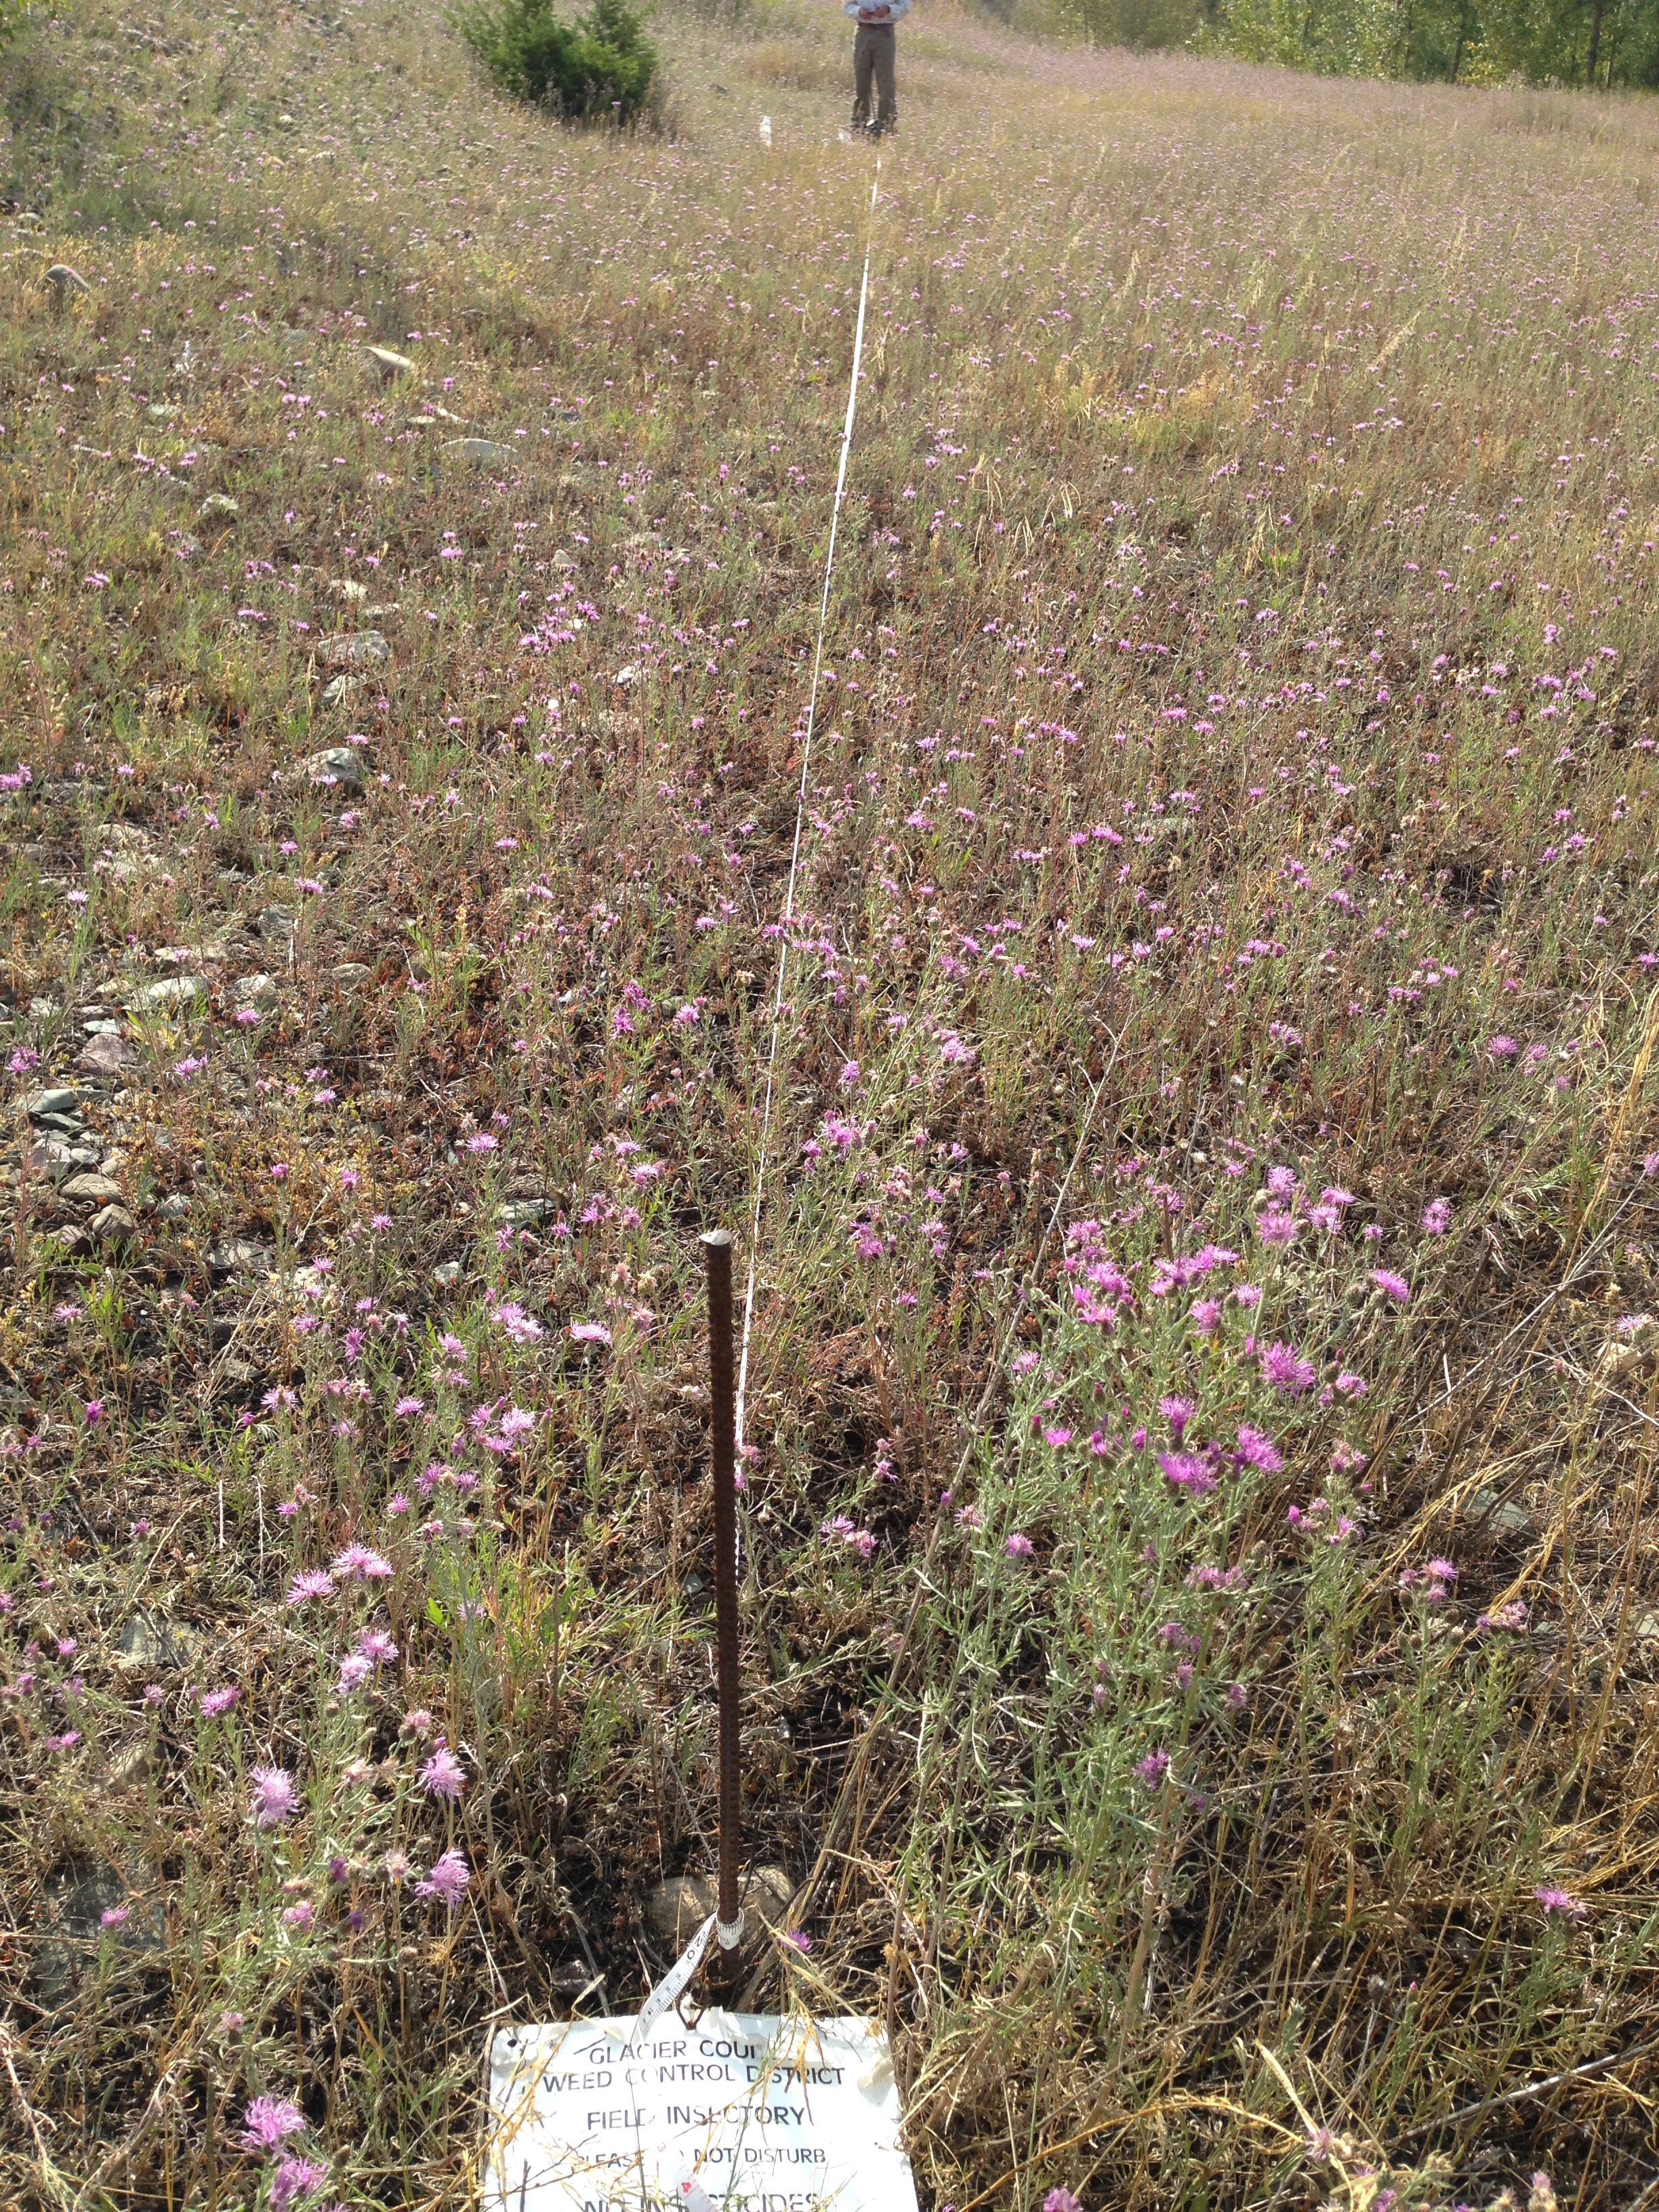 Knapweed Weevil Monitoring Transect